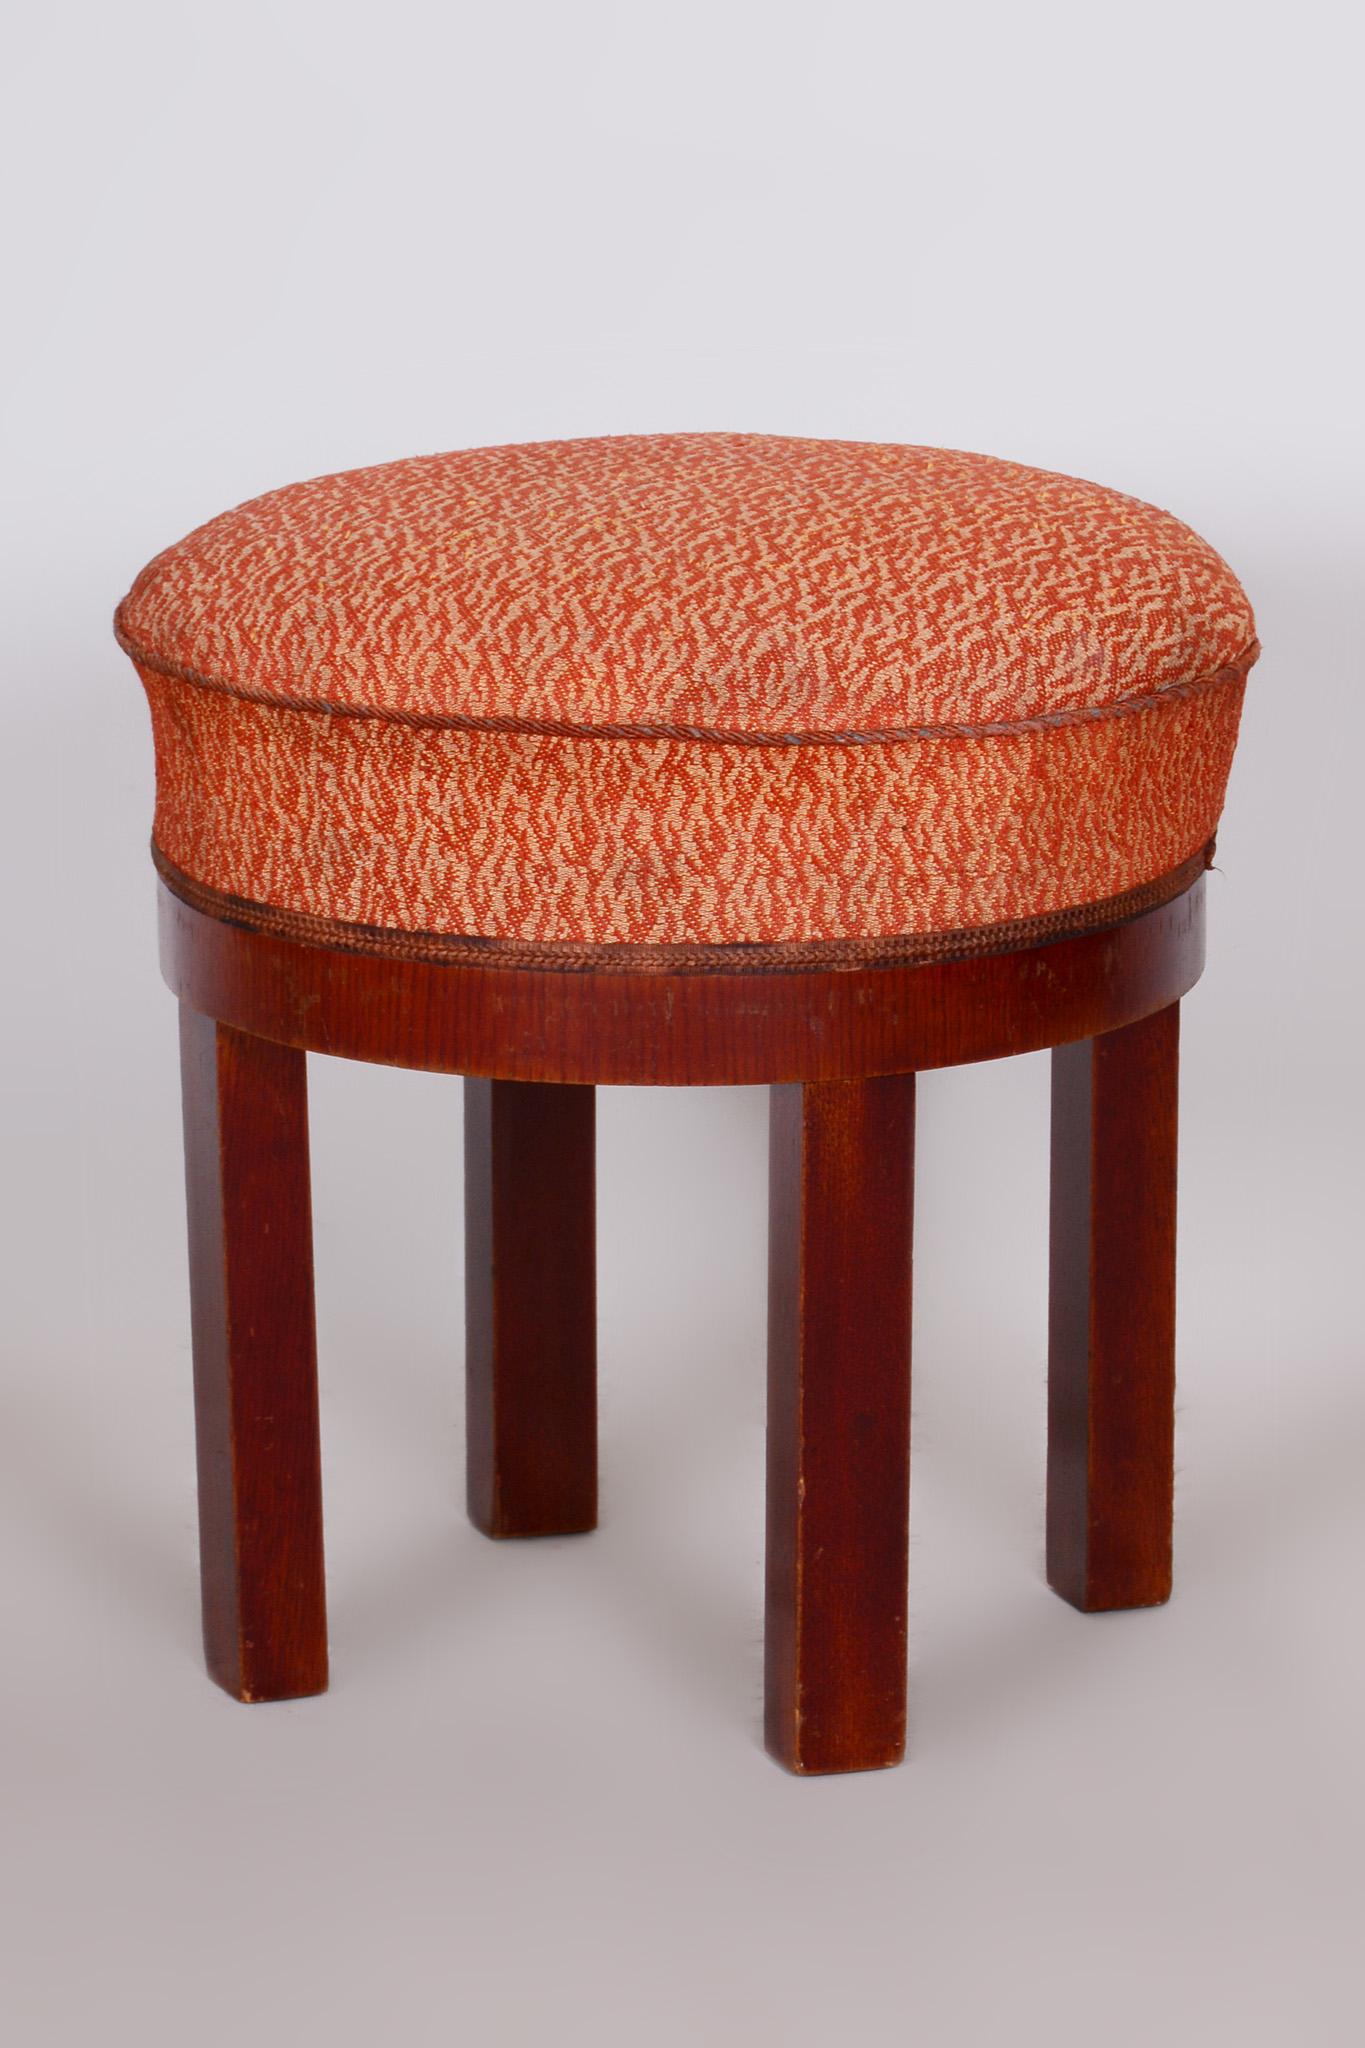 Art Deco foot stool.

Original preserved condition.
Stable wooden construction.
Revived polish.
Professionally cleaned original fabric.

Period: 1930-1939
Material: Oak
Source: Czechia (Czechoslovakia).